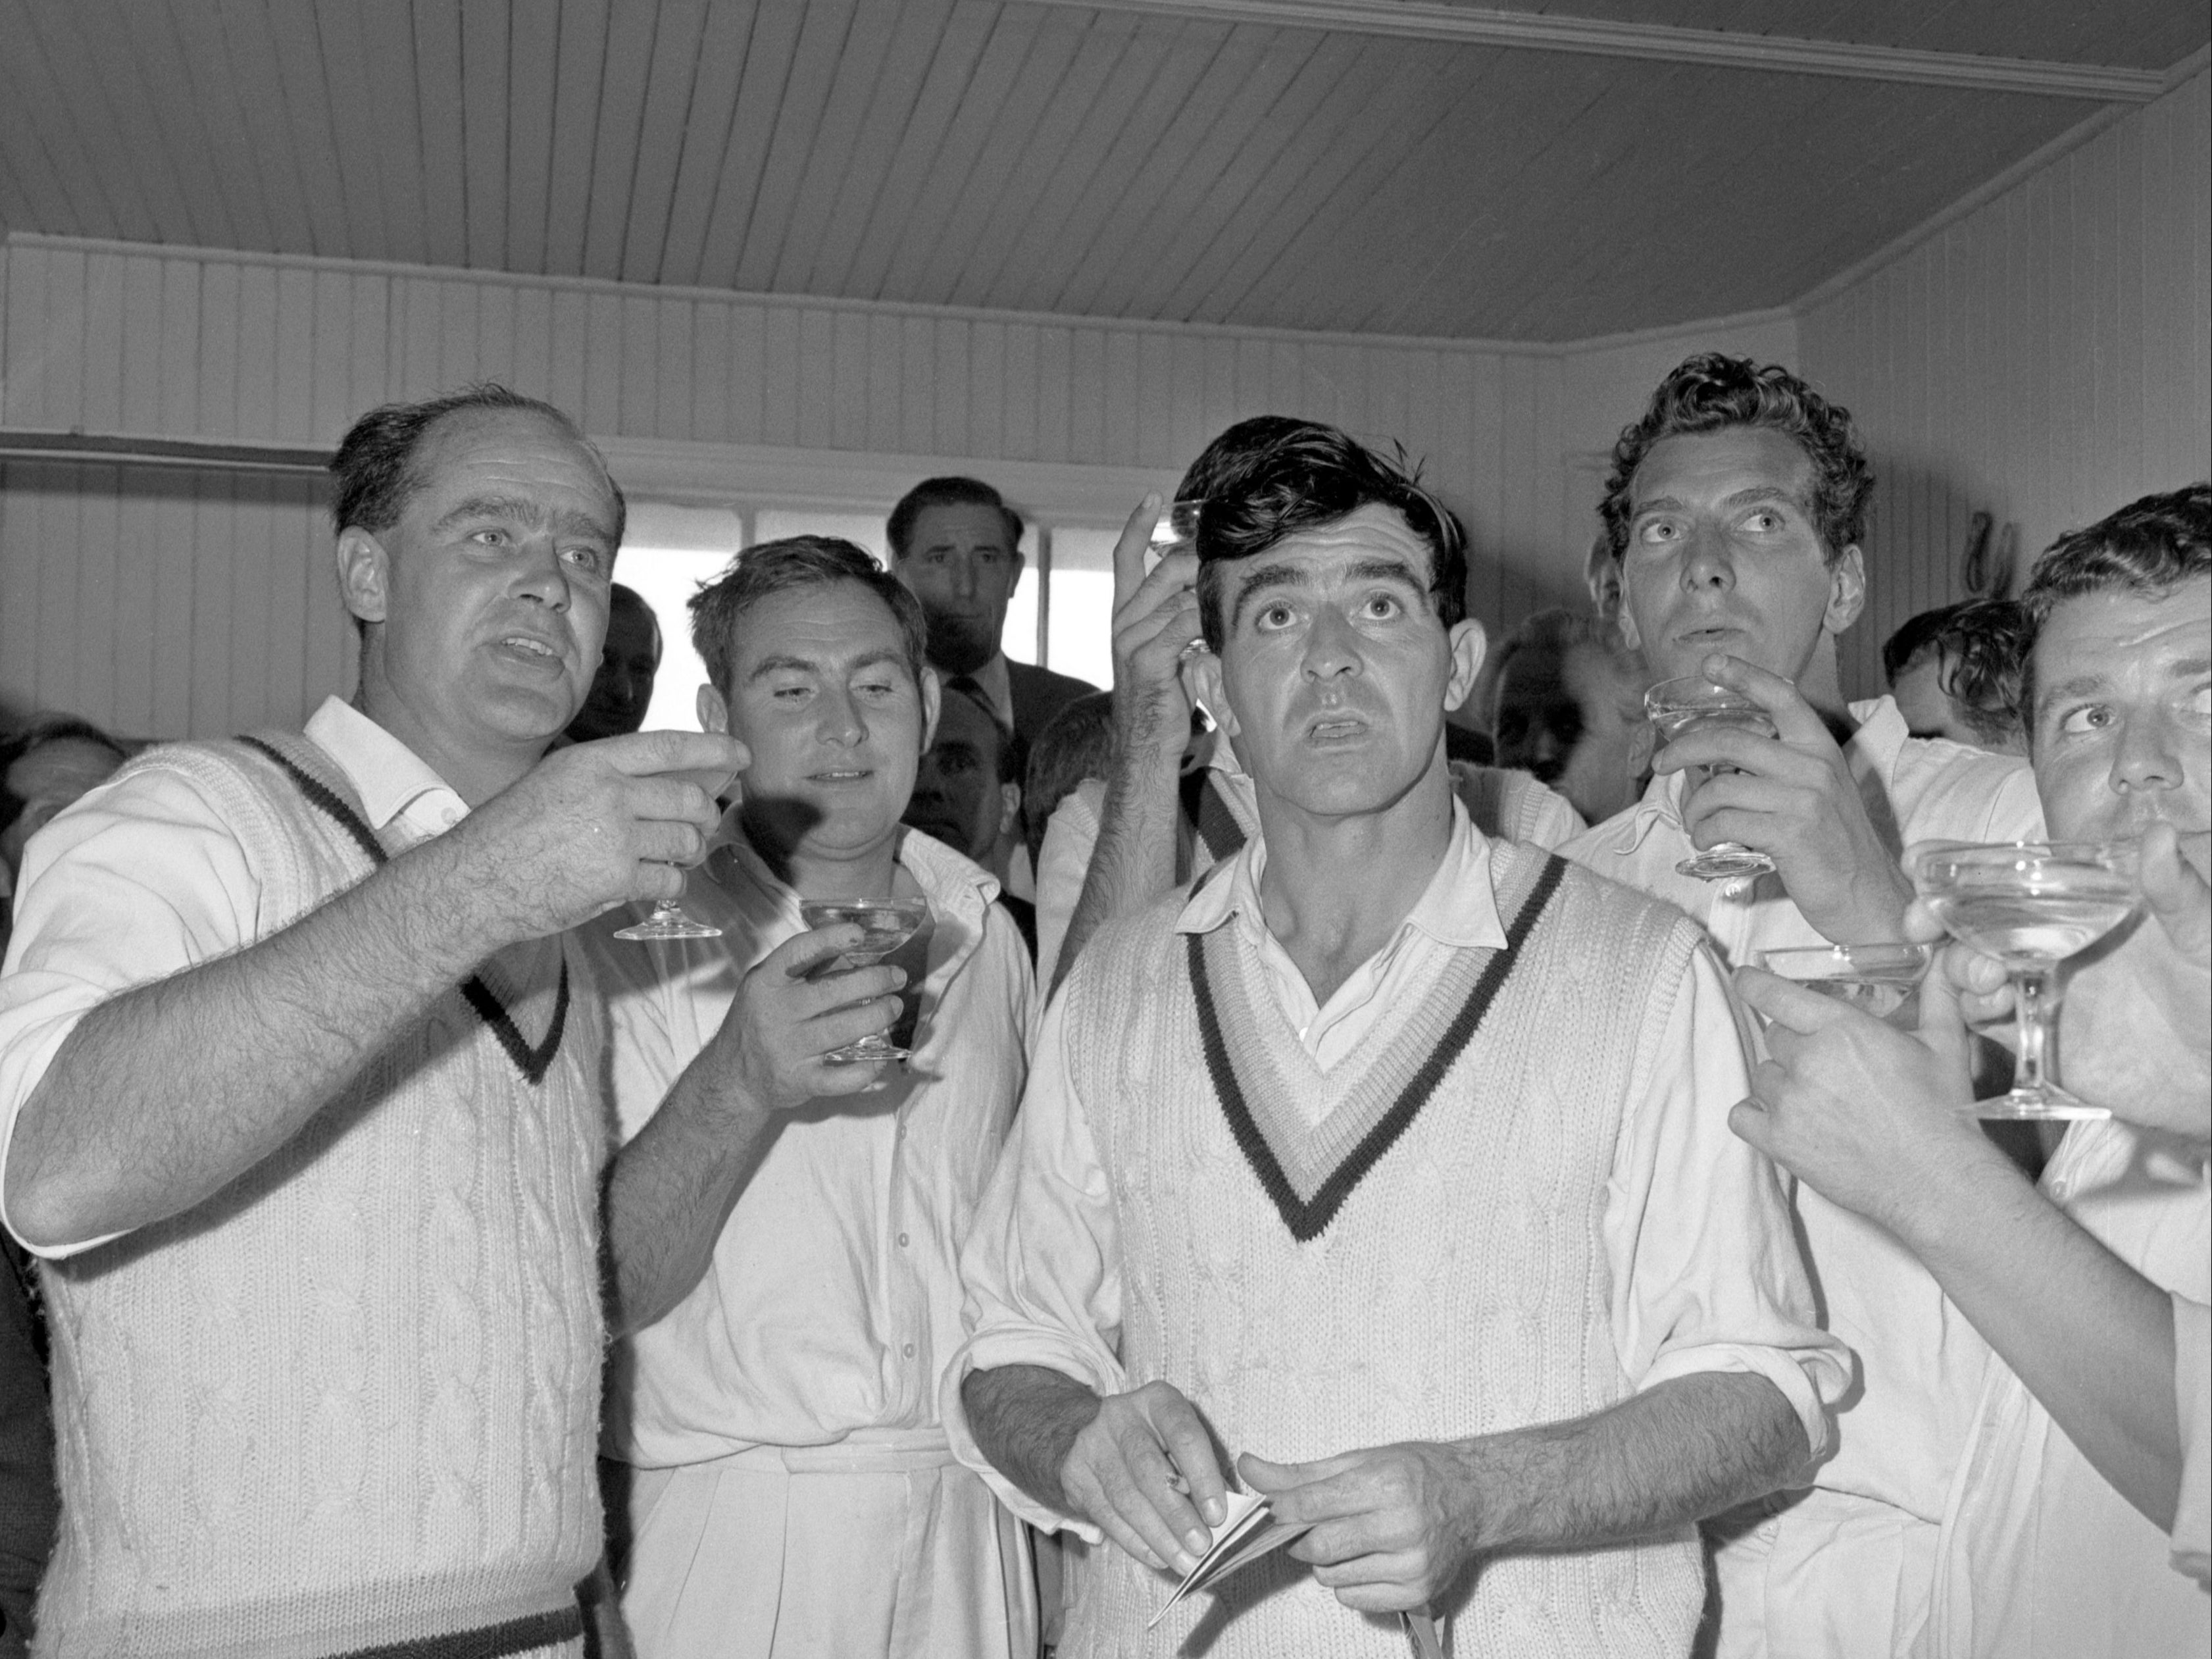 Yorkshire captain Brian Close (left) with Ray Illingworth, Fred Trueman, Don Wilson, and Phil Sharpe in 1966